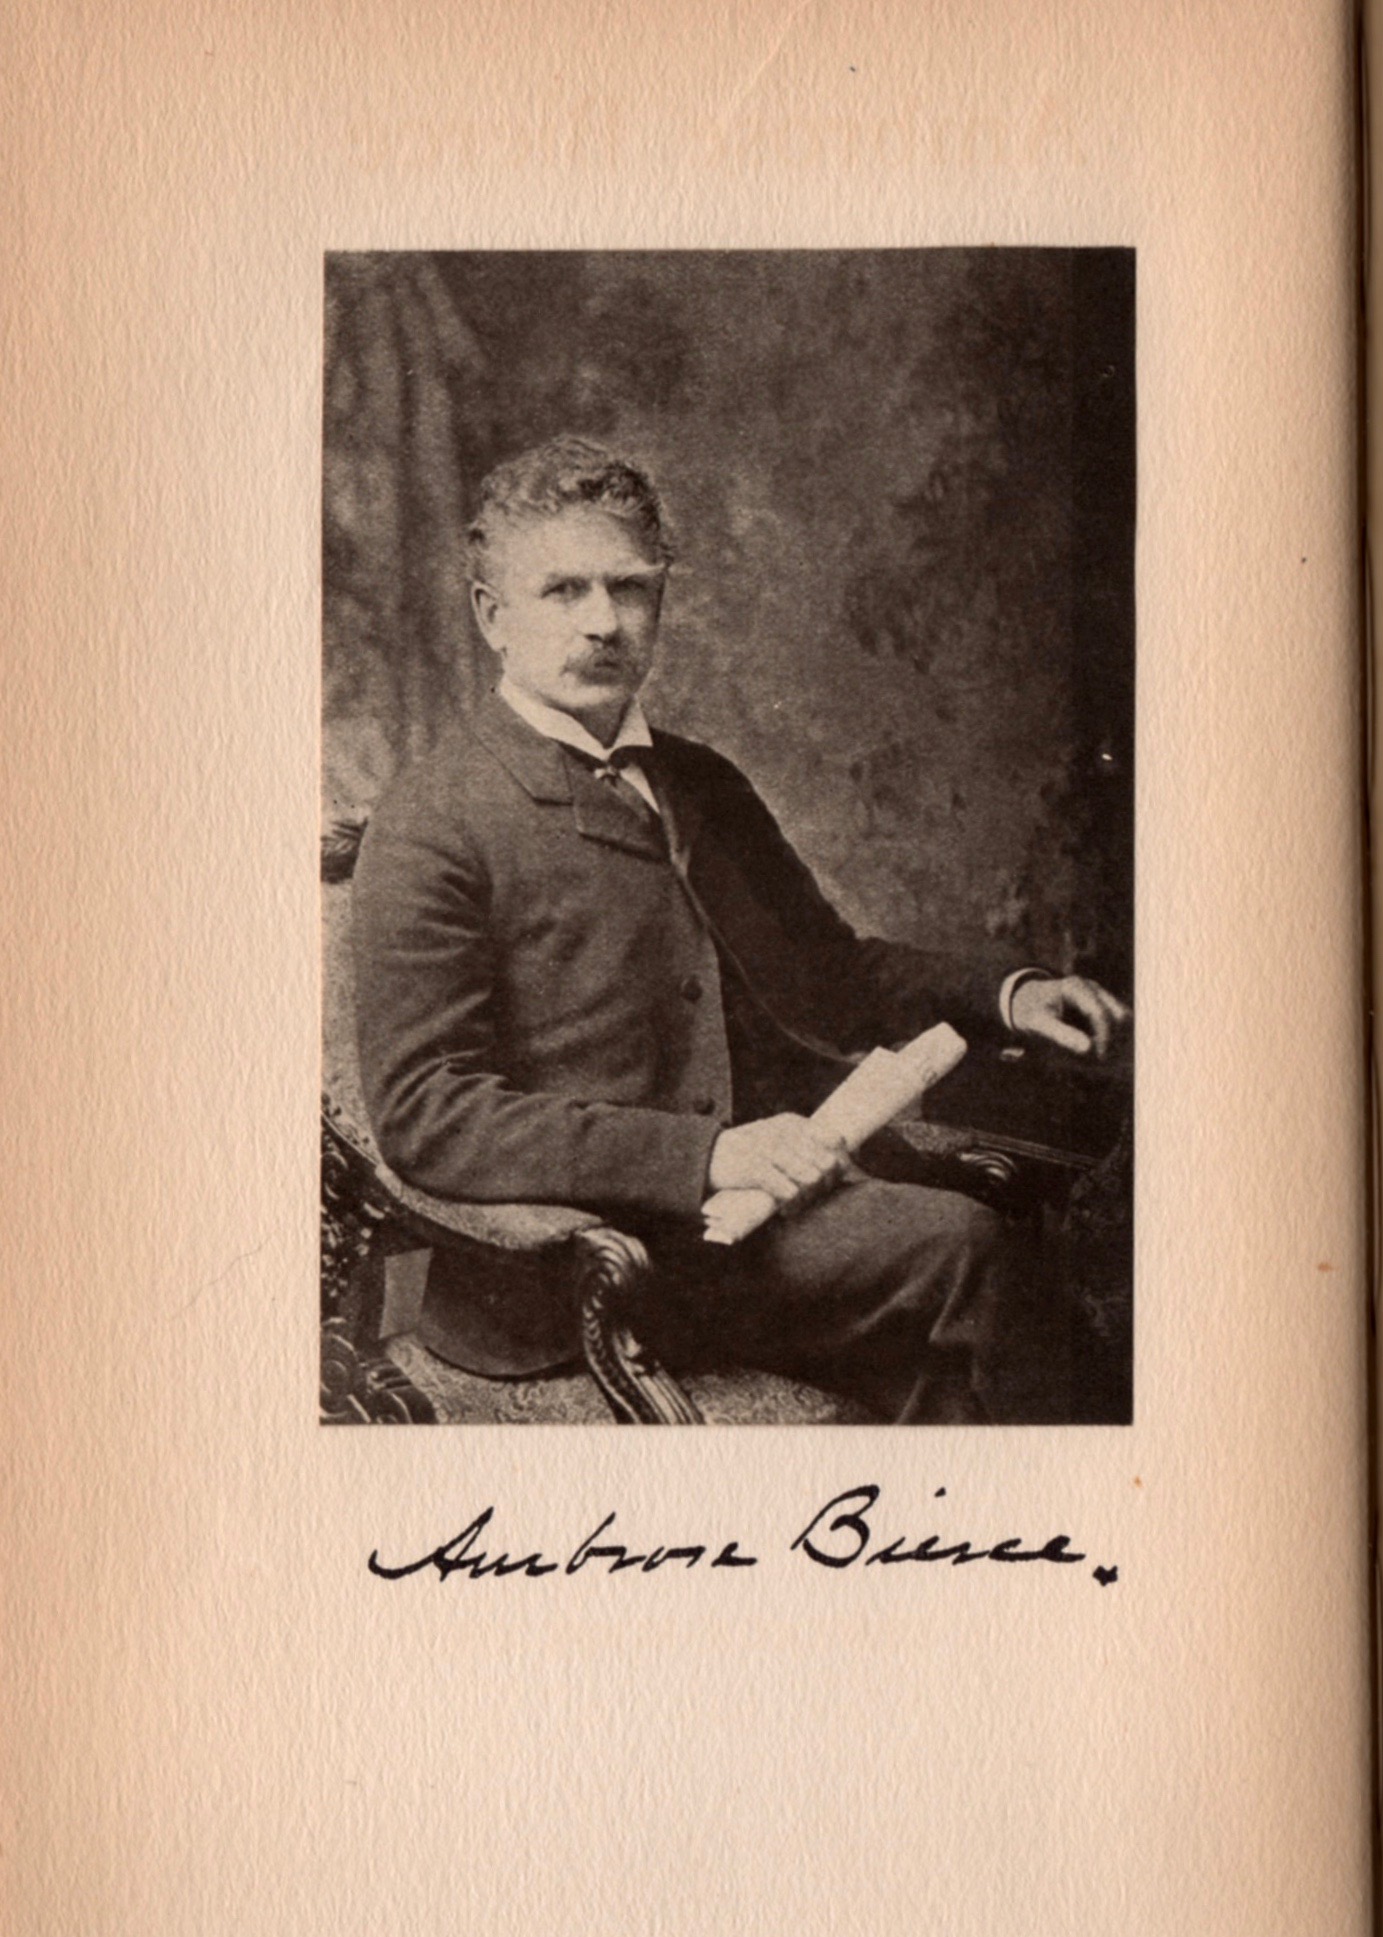  And a photo of Bierce himself. There’s more about Bierce and Starrett  here .  